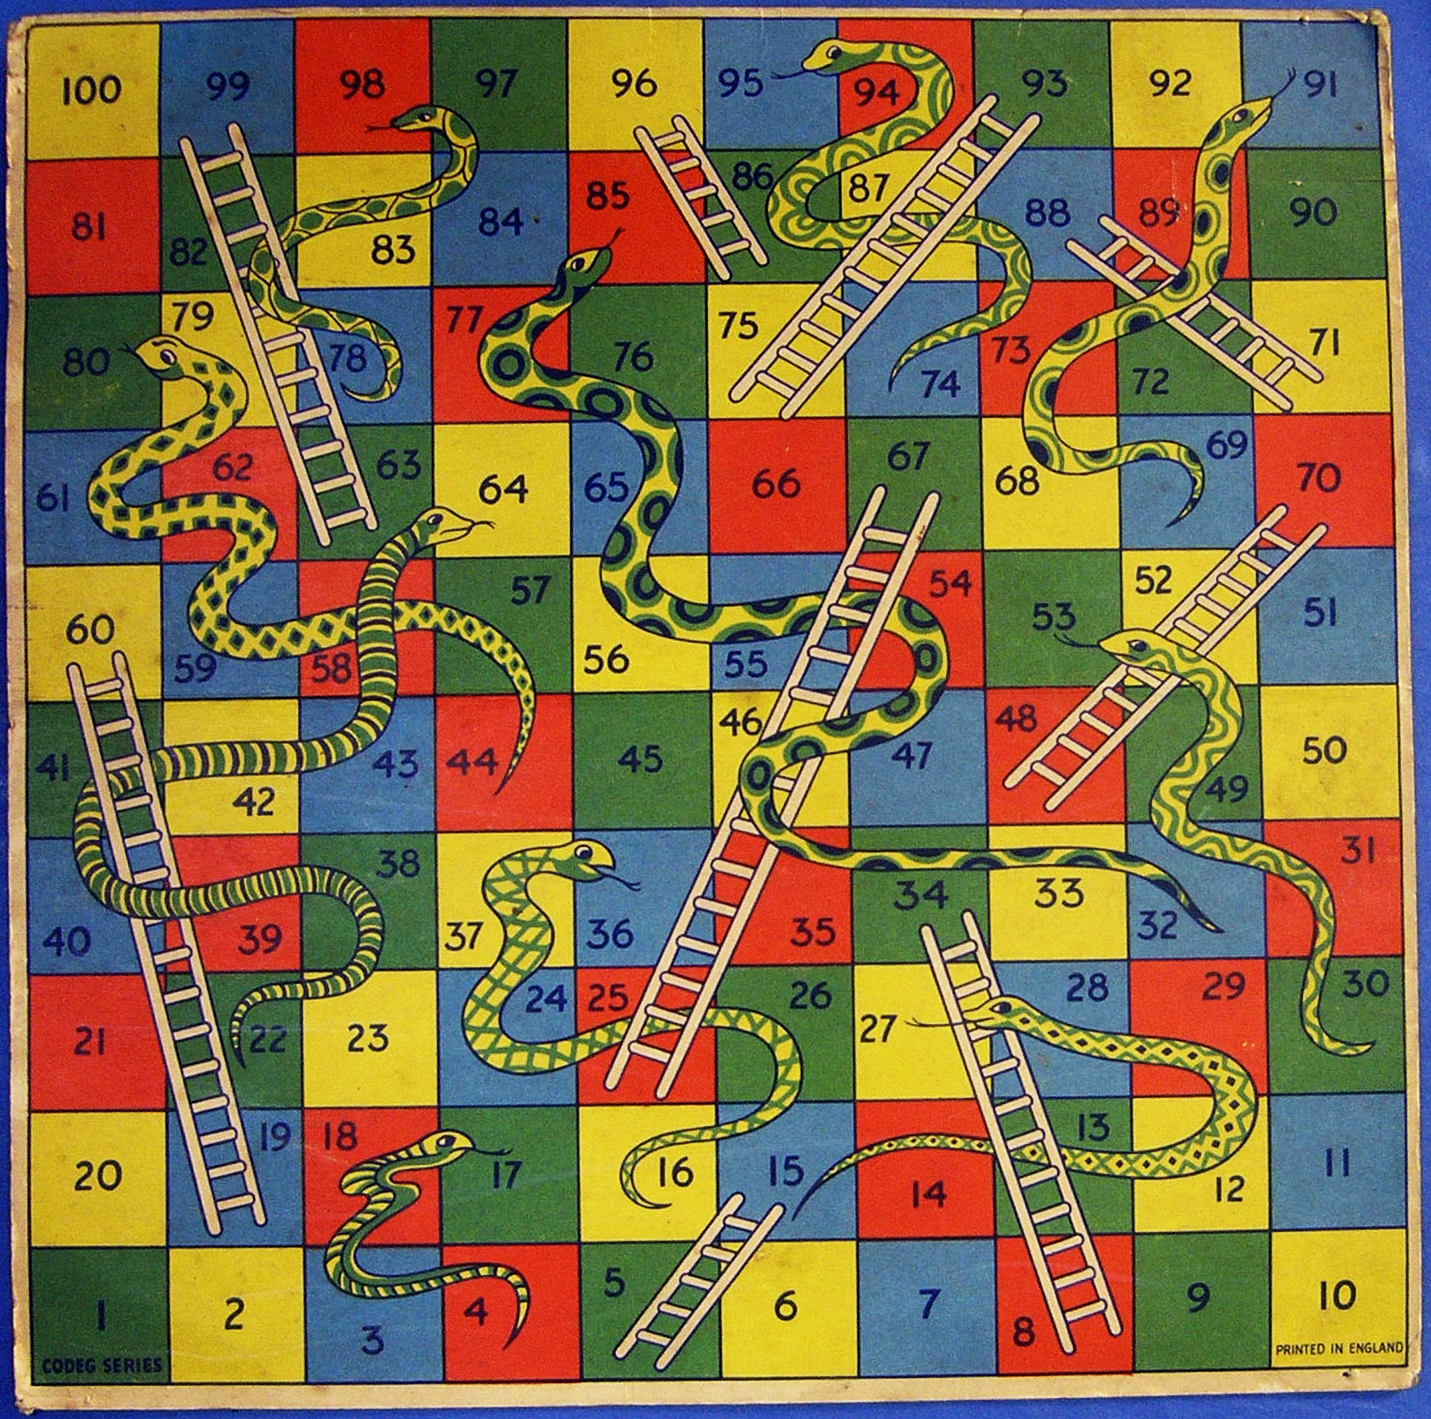 A Snakes and Ladders board